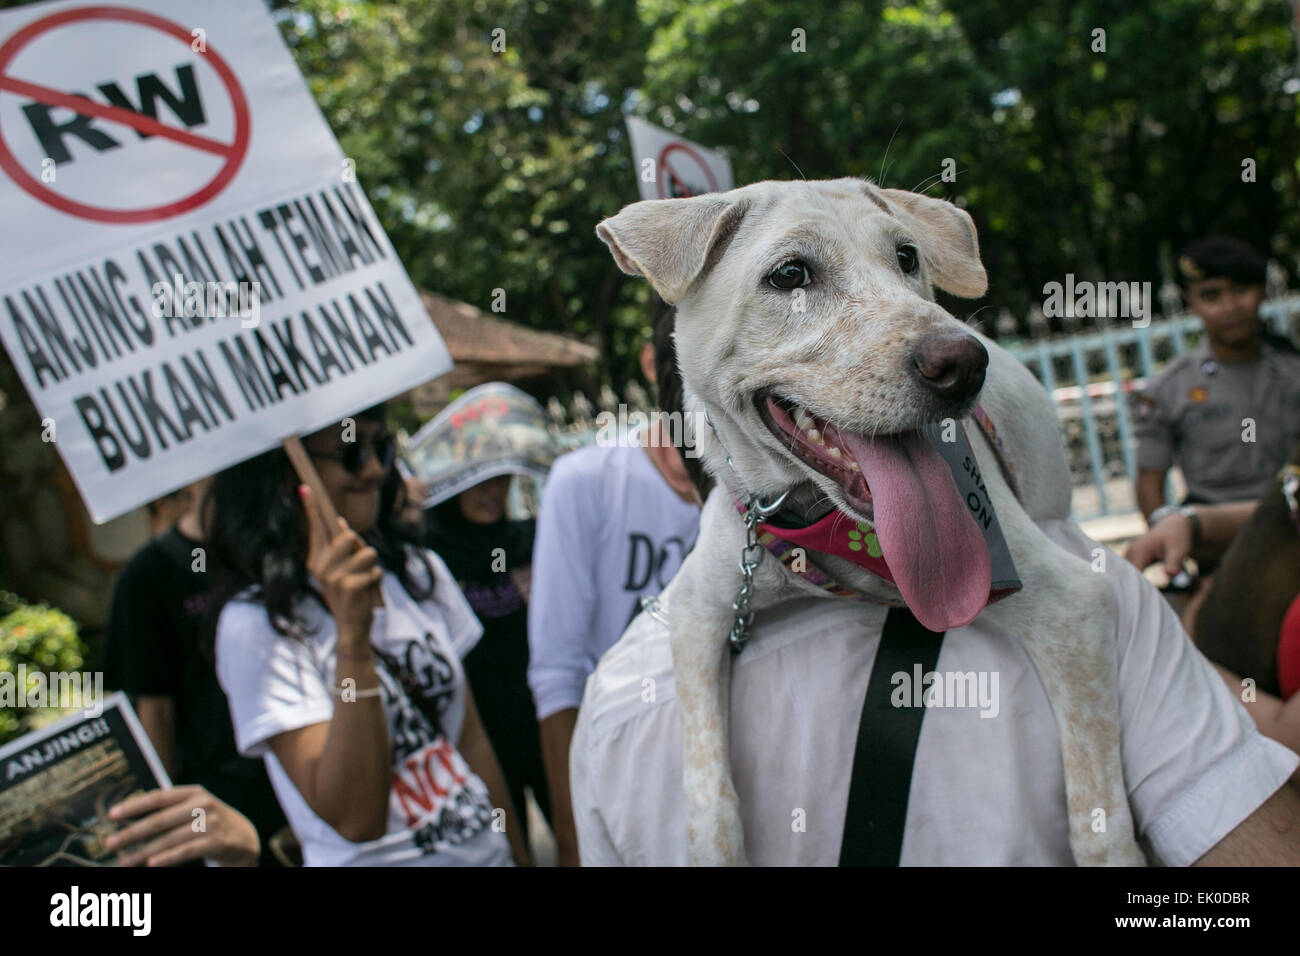 Bali, Indonesia. 4th Apr, 2015. An animal lover carries a dog on his shoulder while activist holding poster saying 'Dogs Are Friends Not Food' during Global March Against Dog Meat in Denpasar, Bali, Indonesia. The protests being held to urges the governments of Bali to stop dog meat trade for consumption, which locally known as 'RW' or food that made out of dog meat. Credit:  Johannes Christo/Alamy Live News Stock Photo